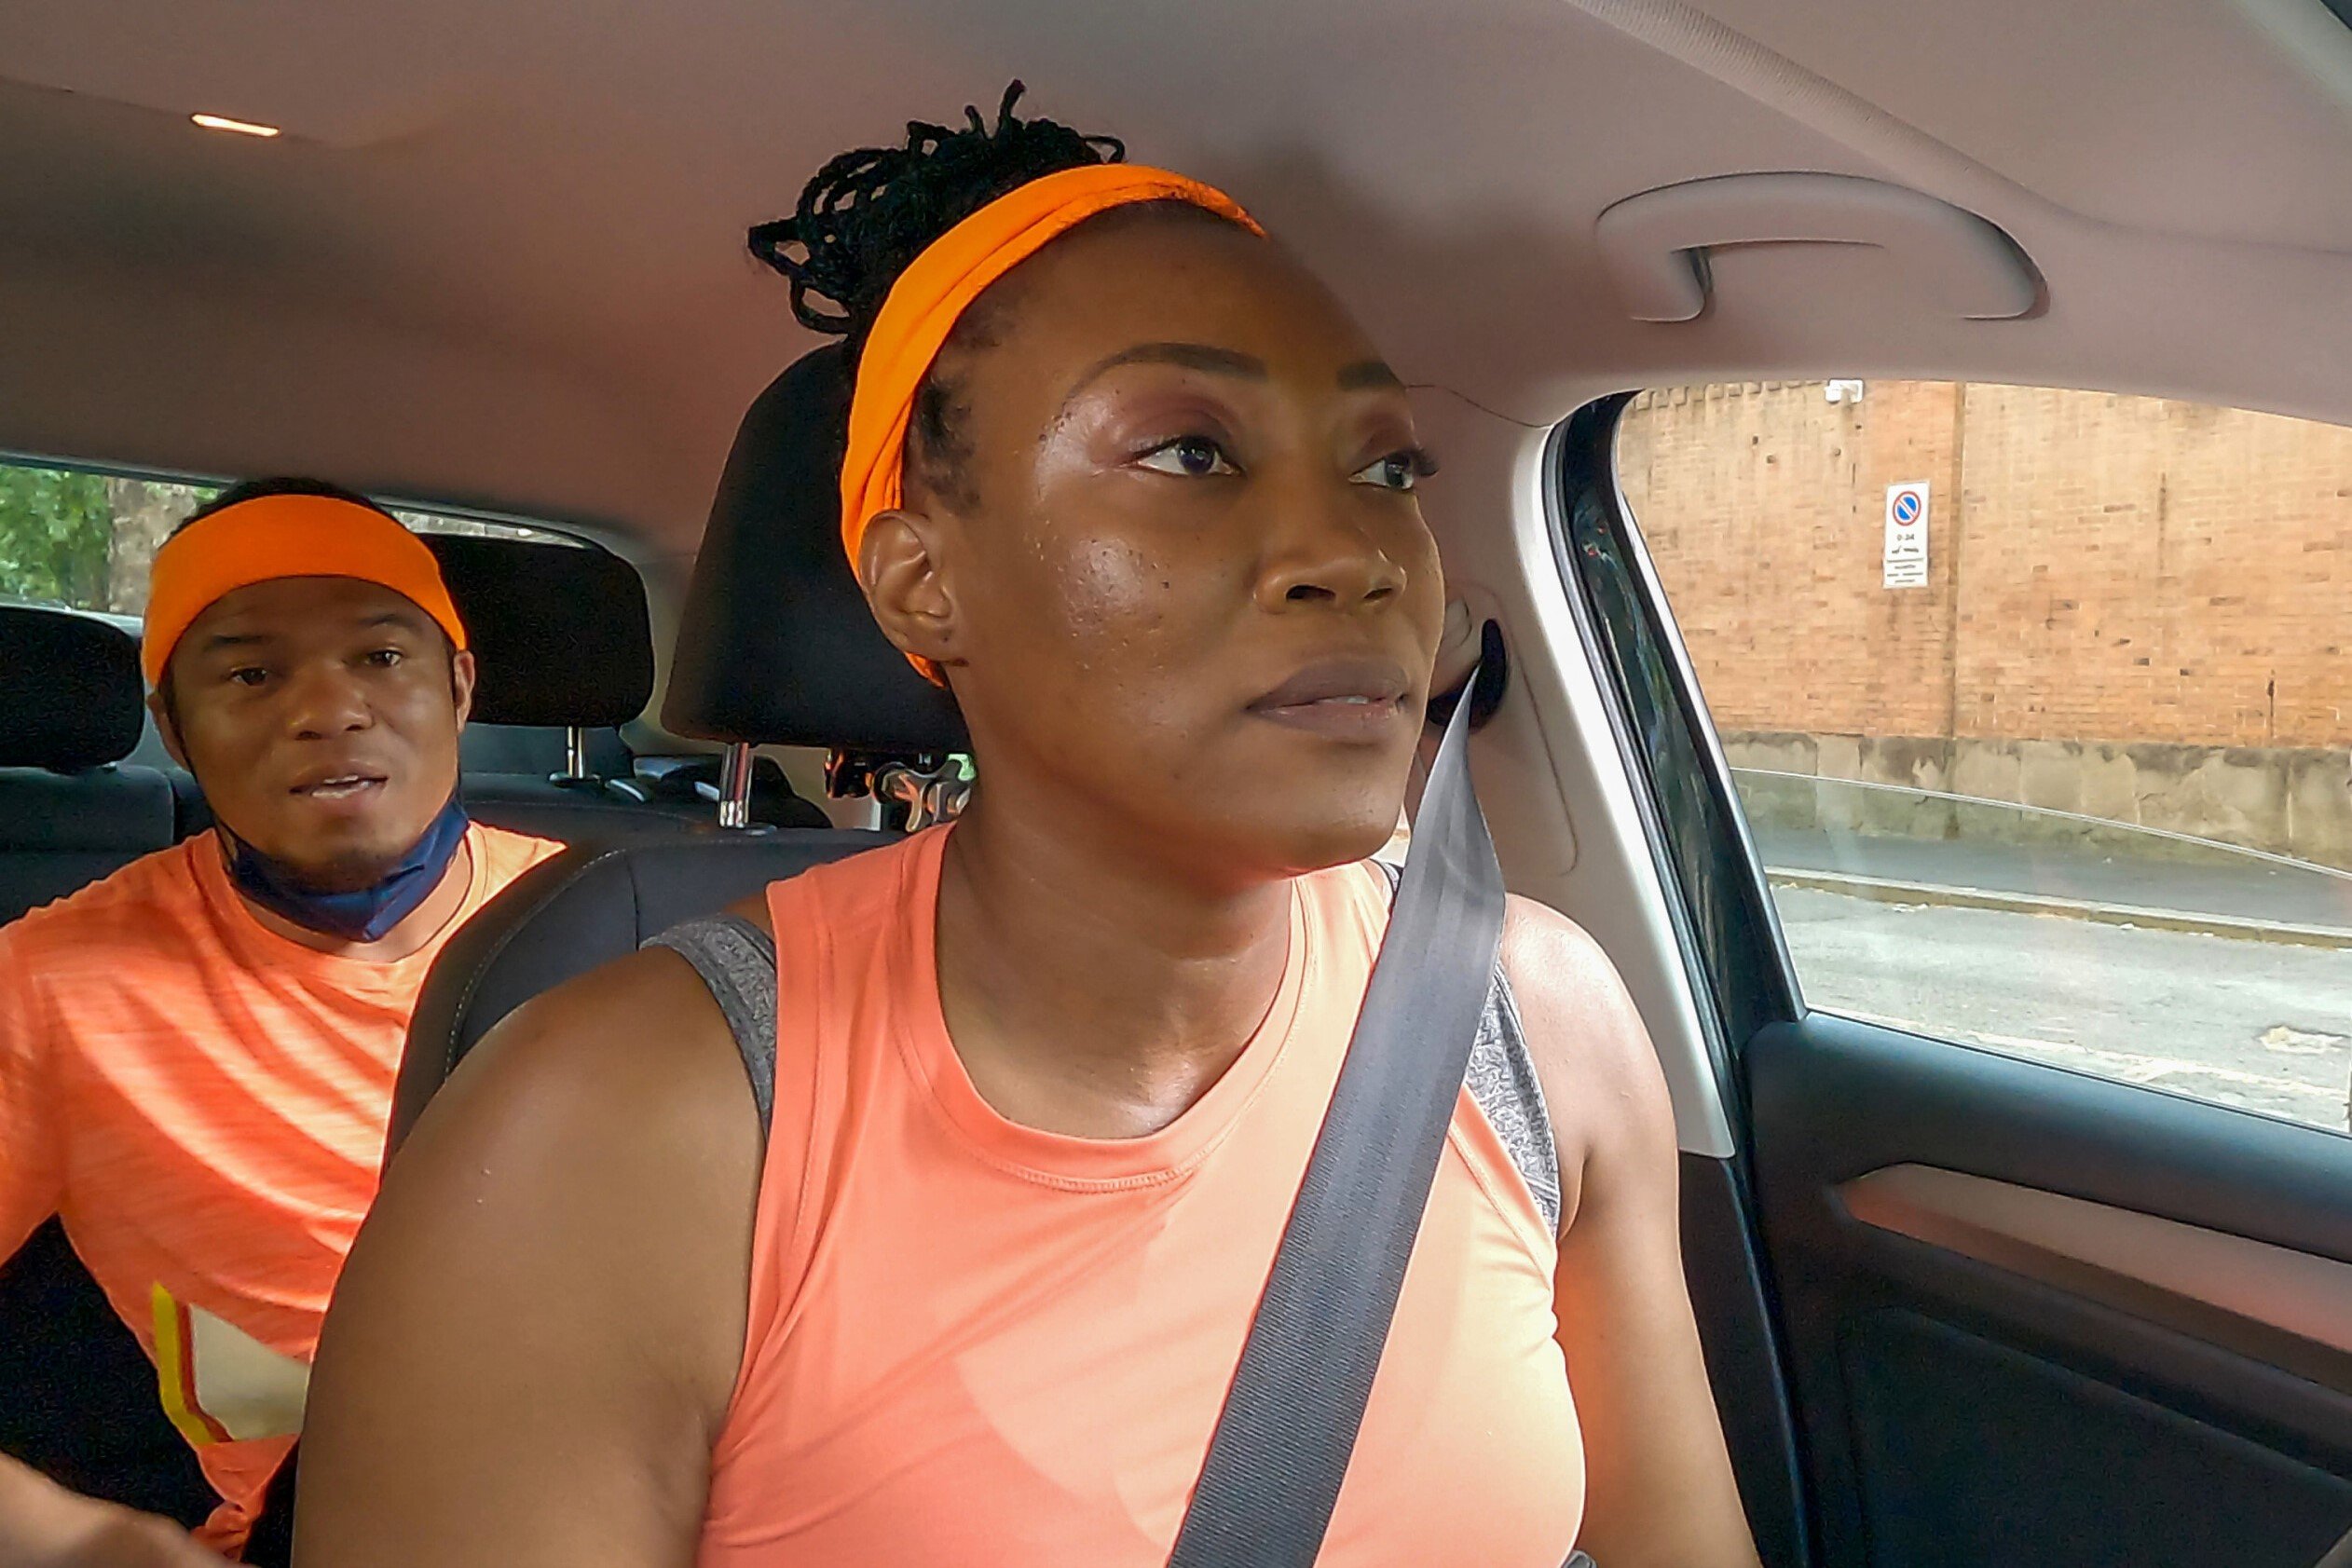 Lumumba Roberts and Glenda Roberts, one of the teams in 'The Amazing Race' Season 34, drive in a car, with Lumumba in the backseat and Glenda in the driver's seat. They both wear orange shirts and orange headbands.